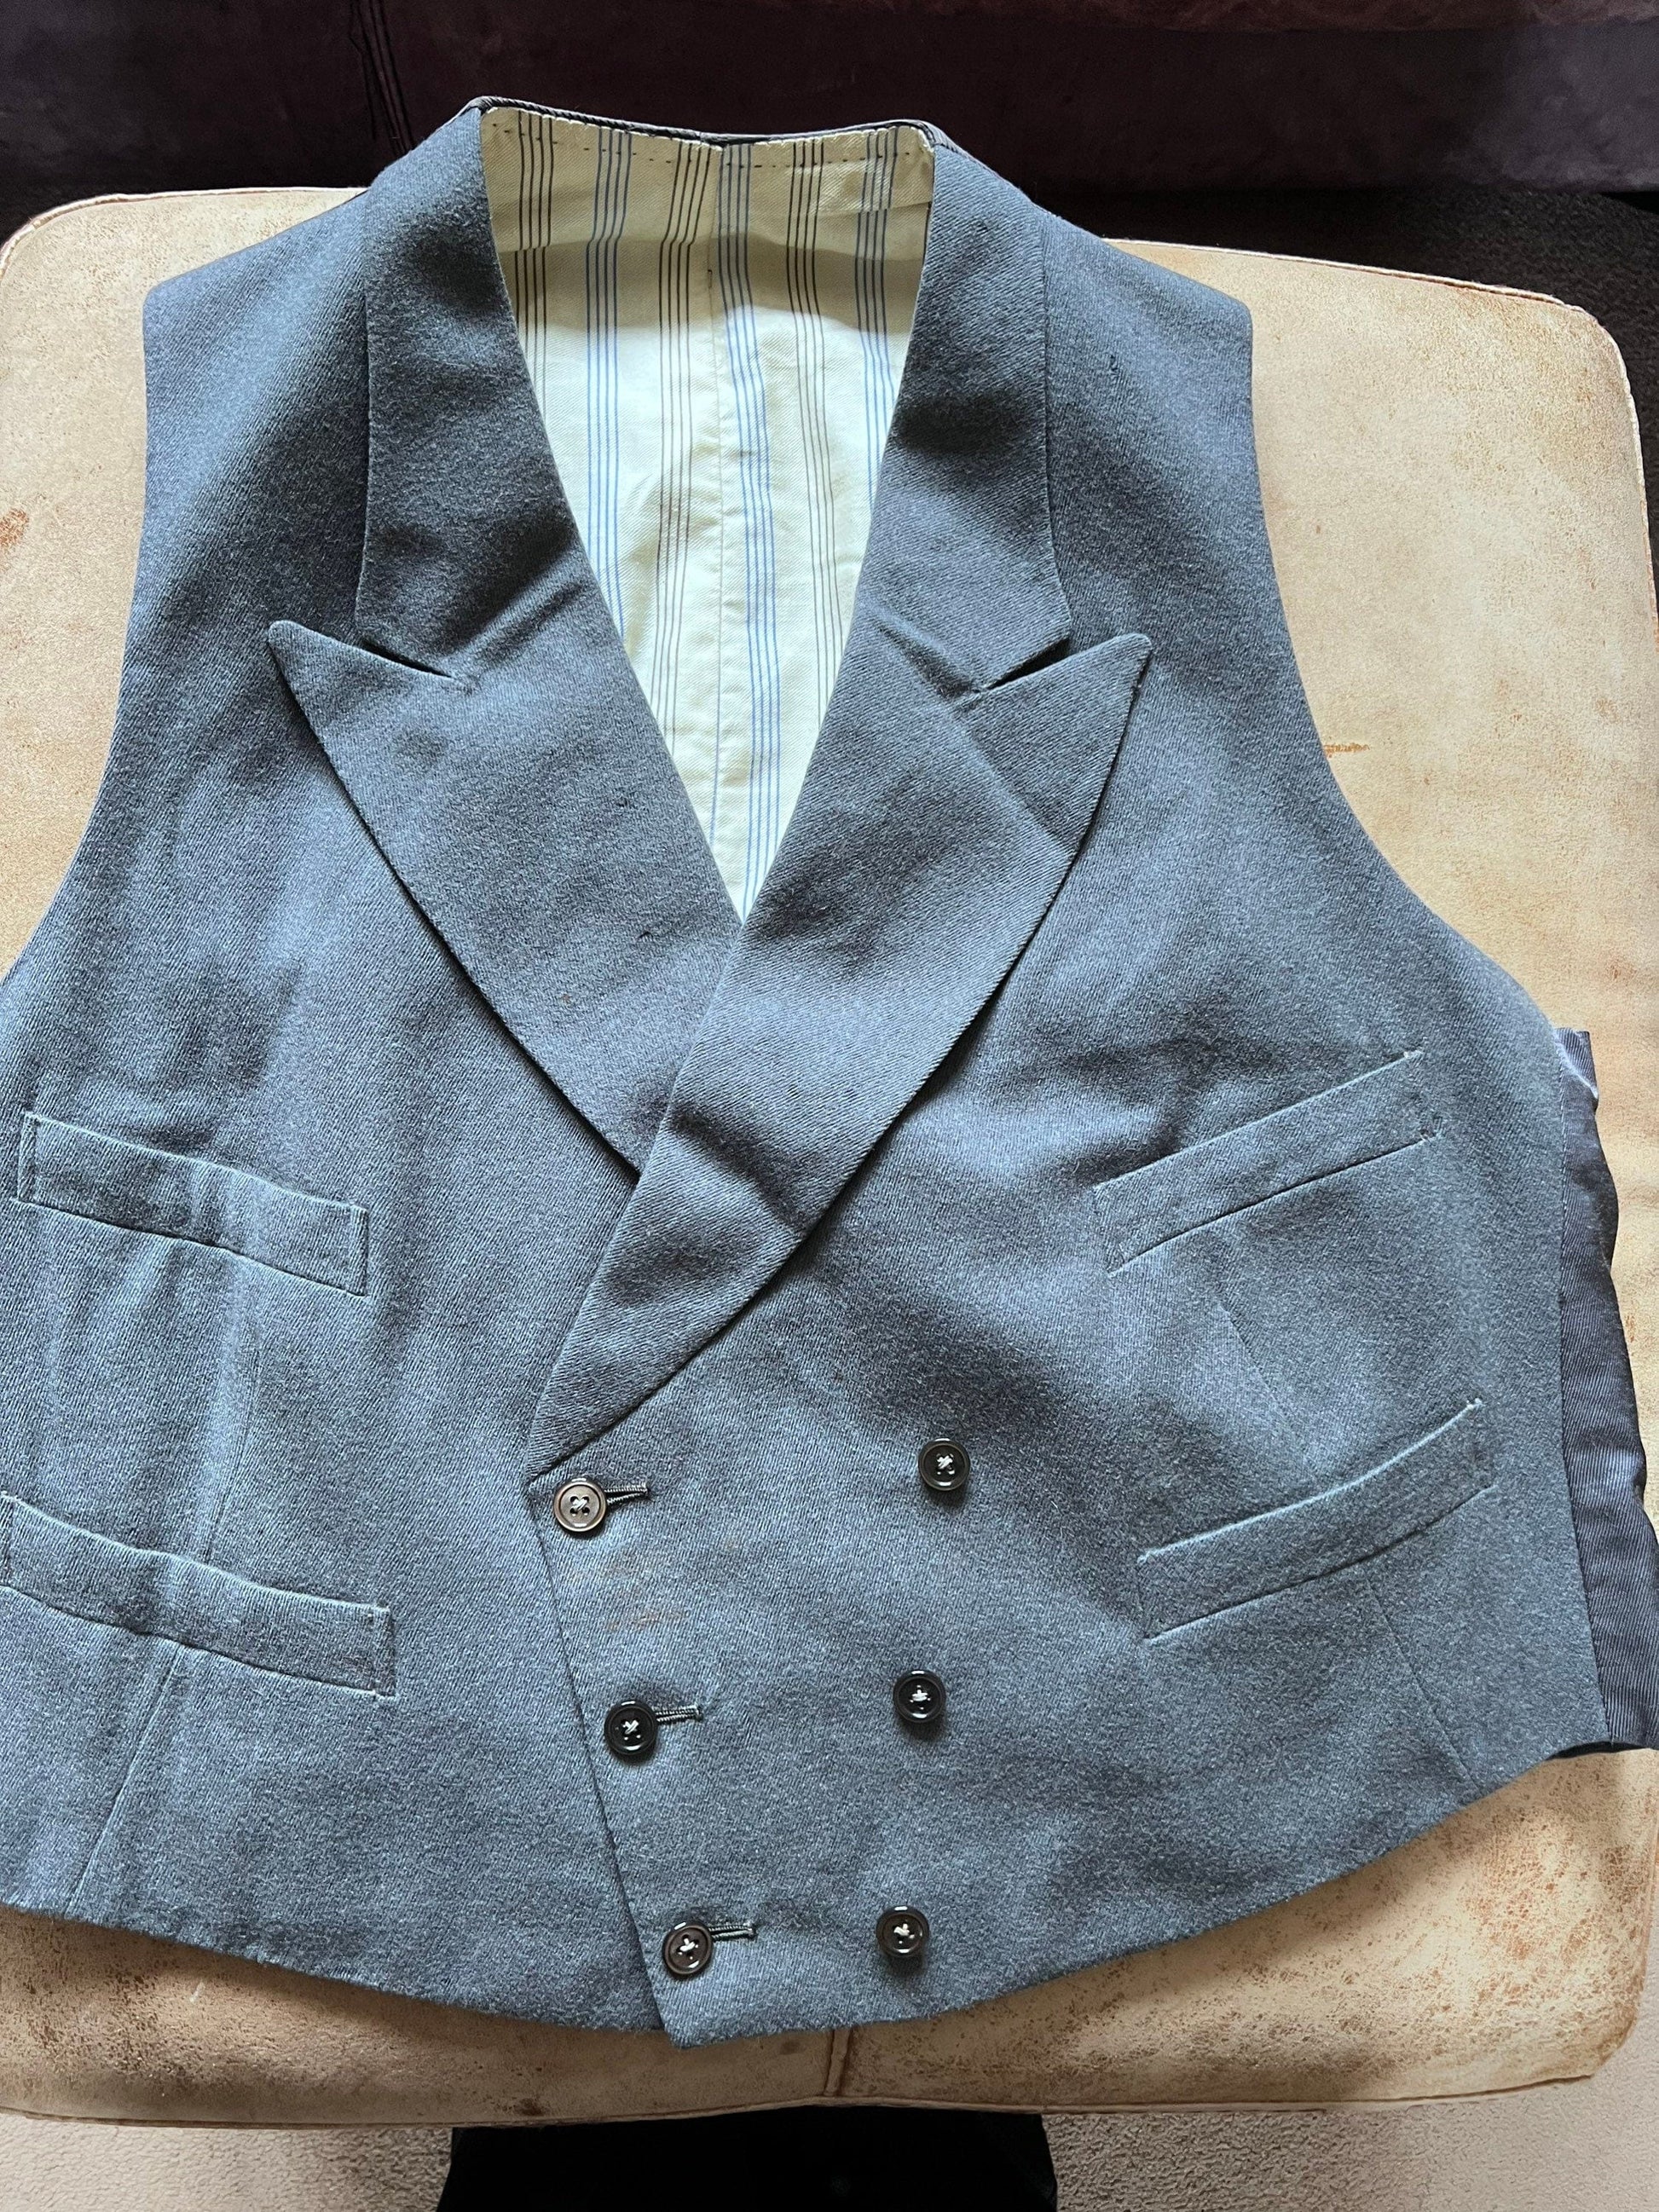 Vintage Double breasted Waistcoat Vest, Airforce Blue Double breasted waistcoat, Bespoke British Made Vintage Waistcoat RAF Blue Waistcoat